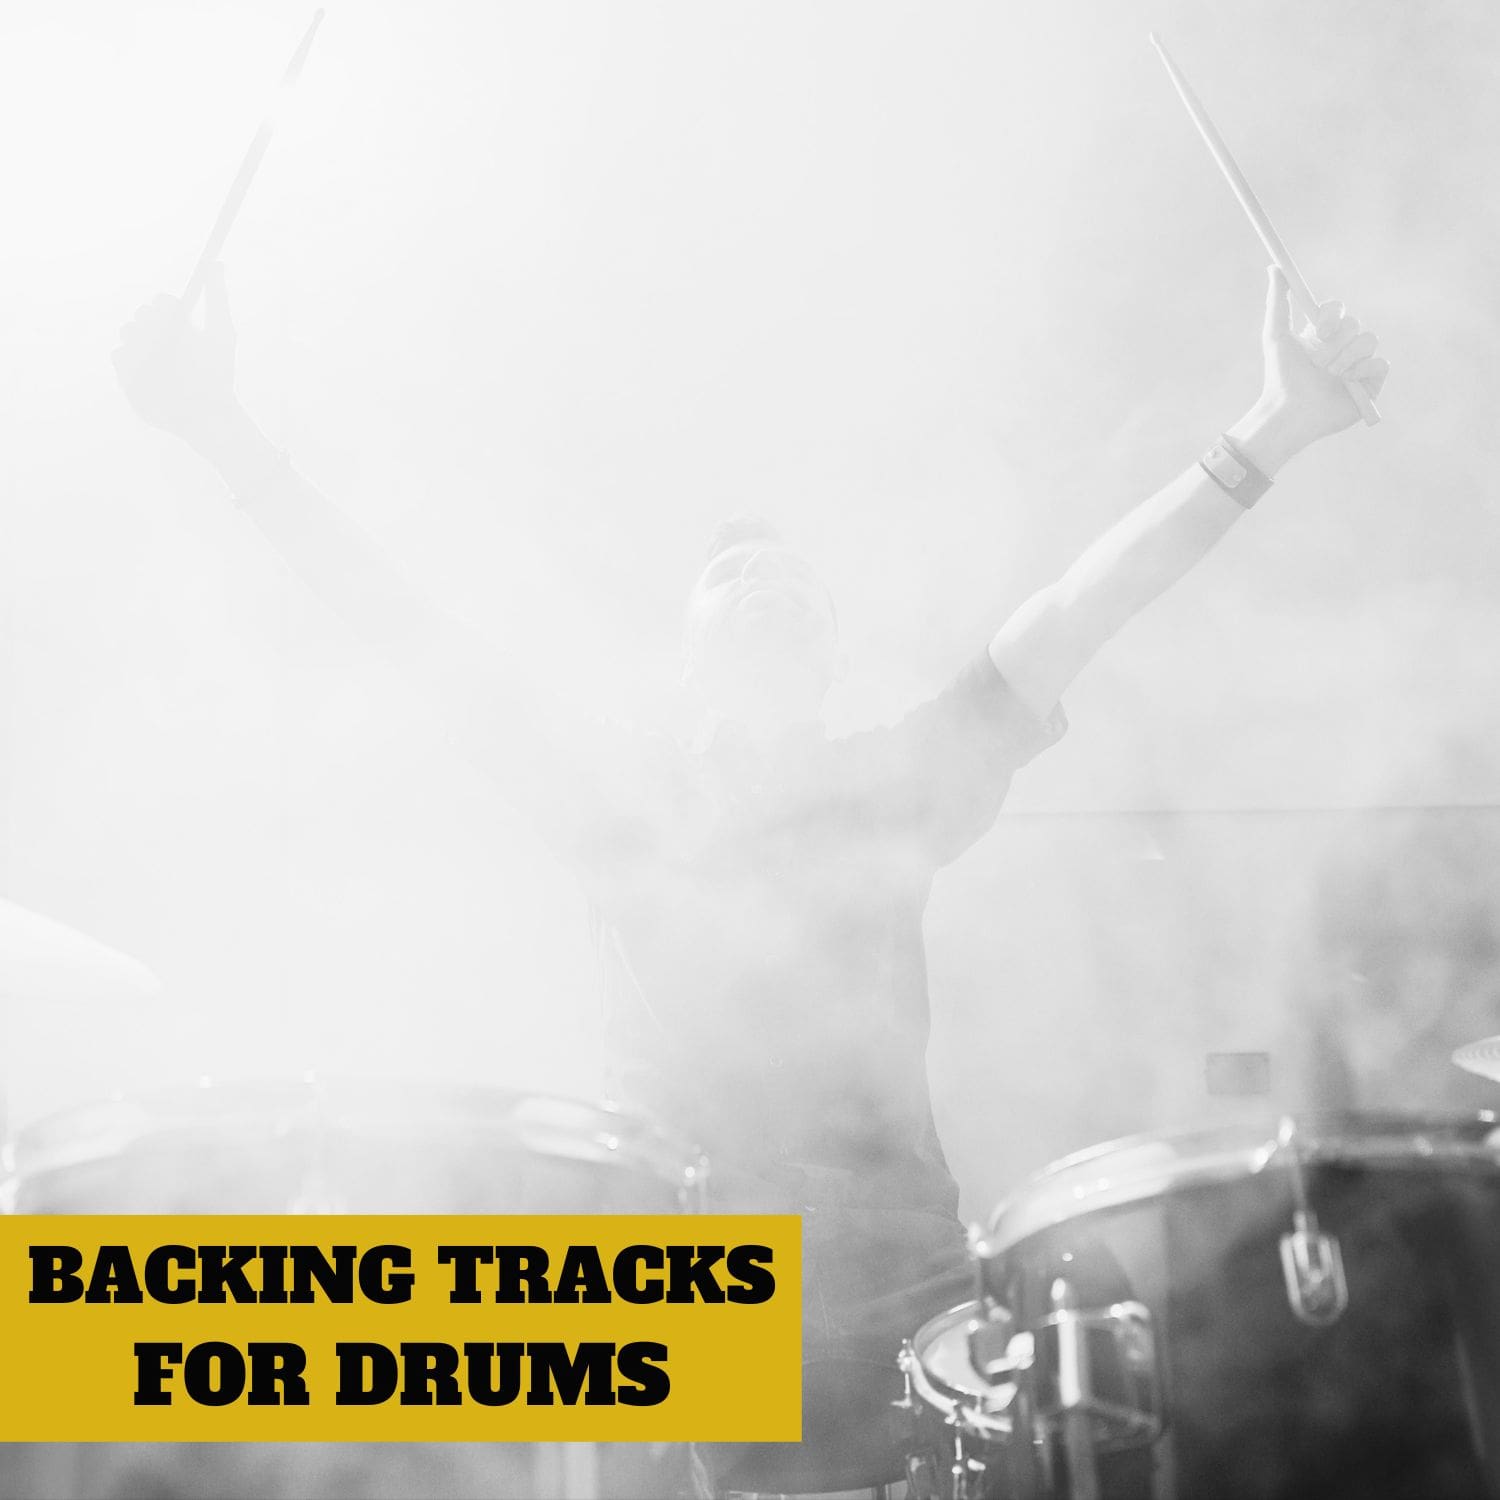 Backing tracks for drummers